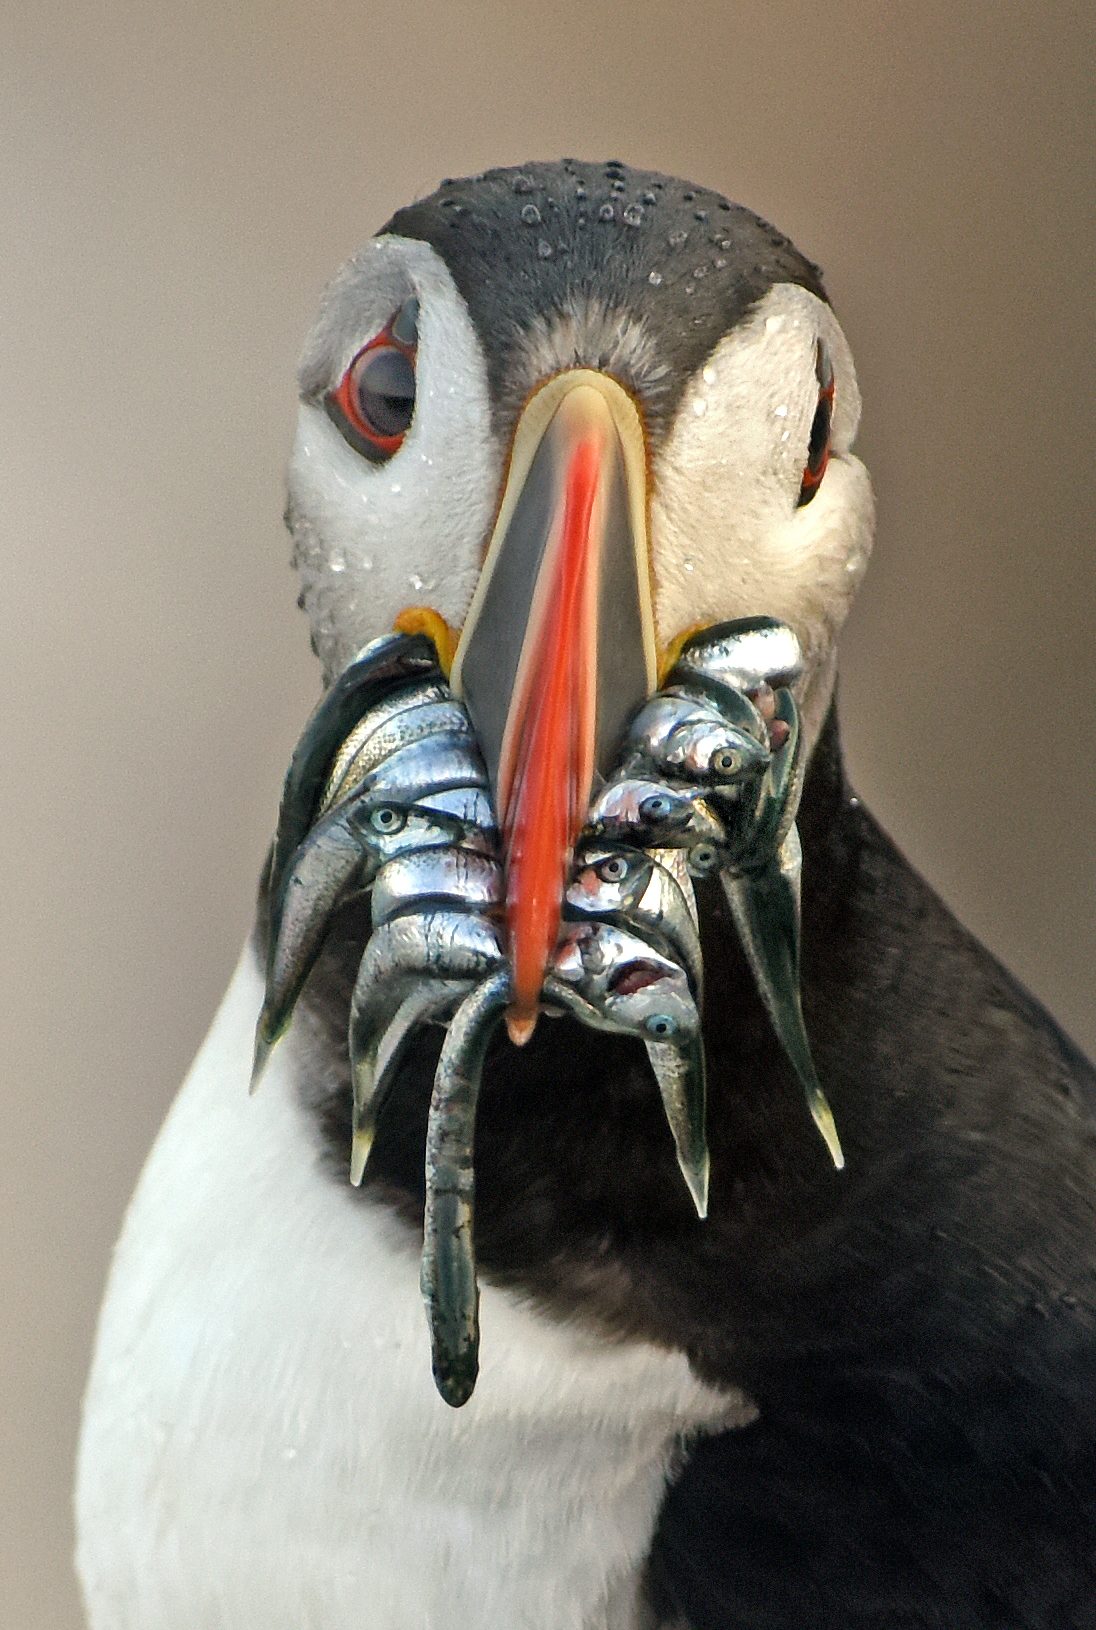 Puffin with half a dozen fish in its beak seemingly poses for a photo